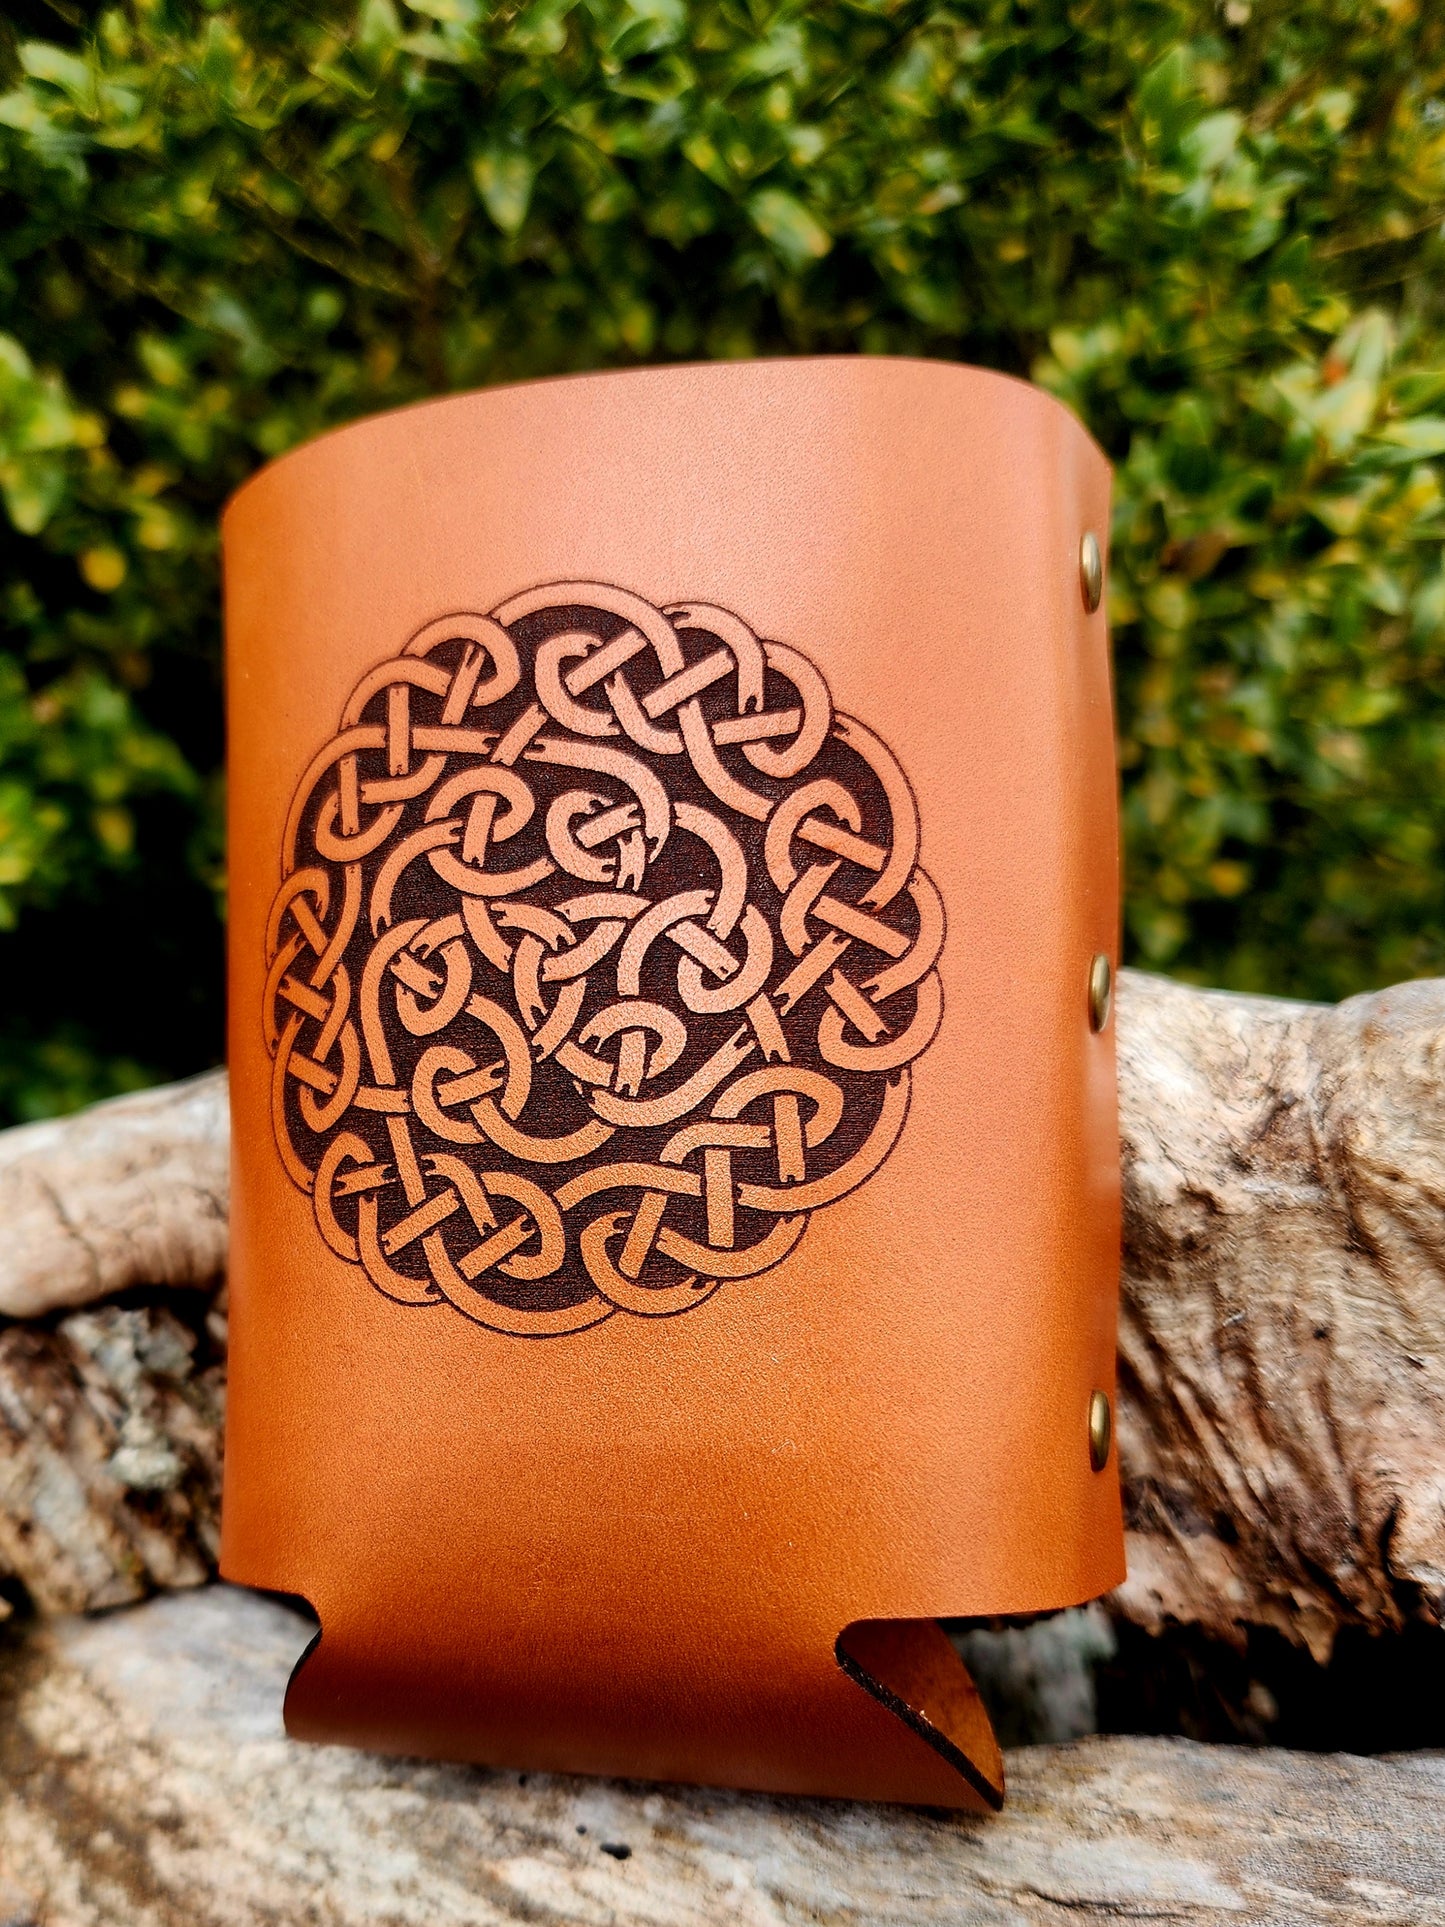 Celic Knot engraved Leather beverage cozie - beer can holder